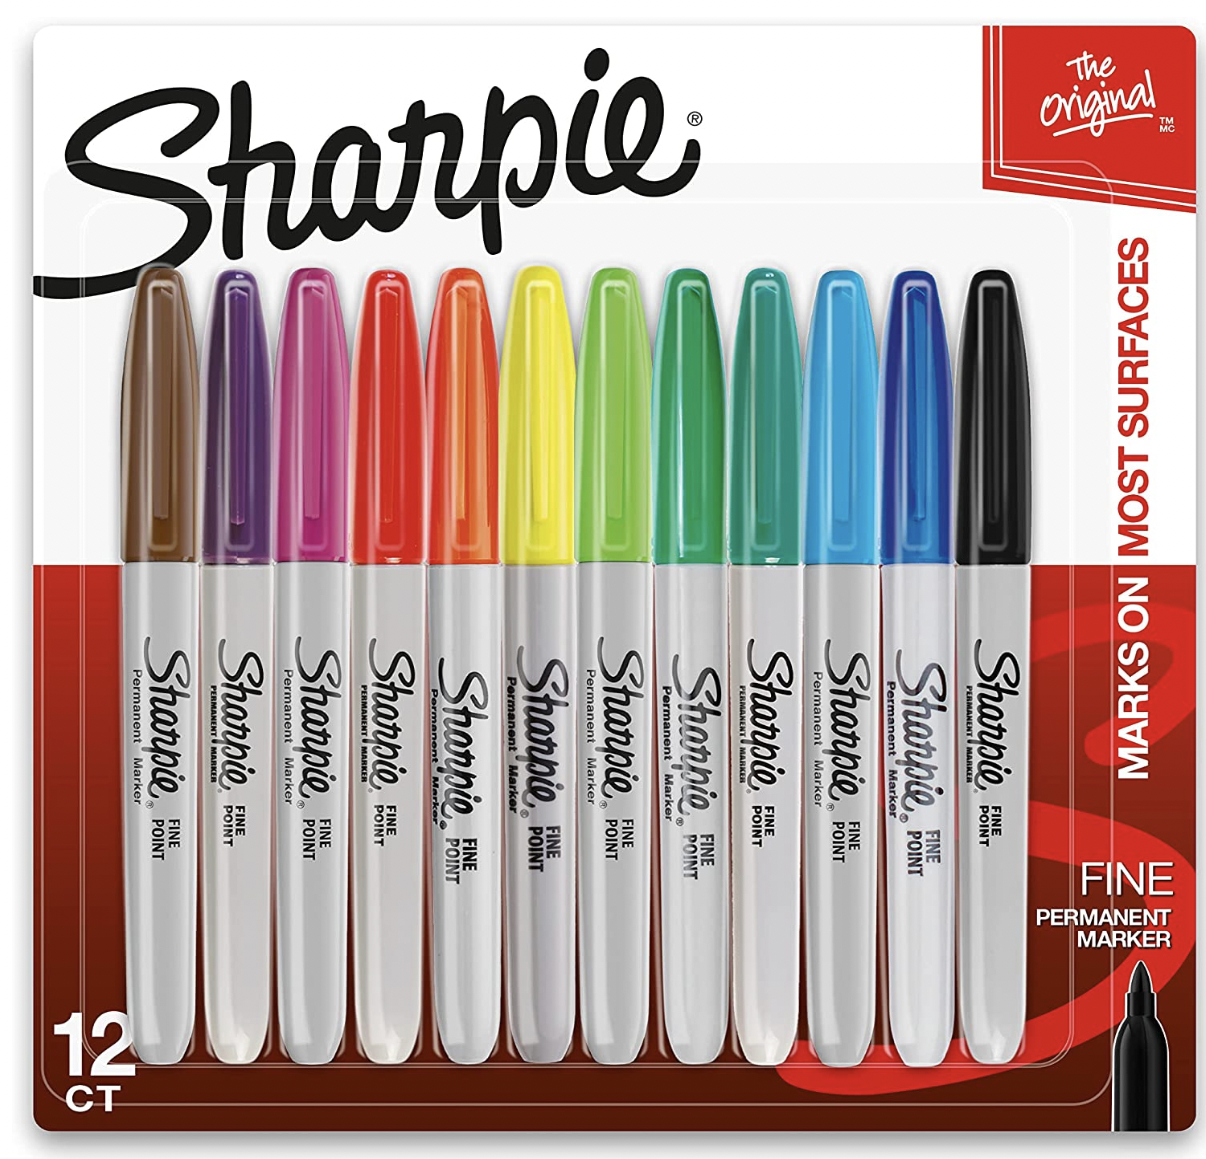 Sharpie 12 count from Amazon